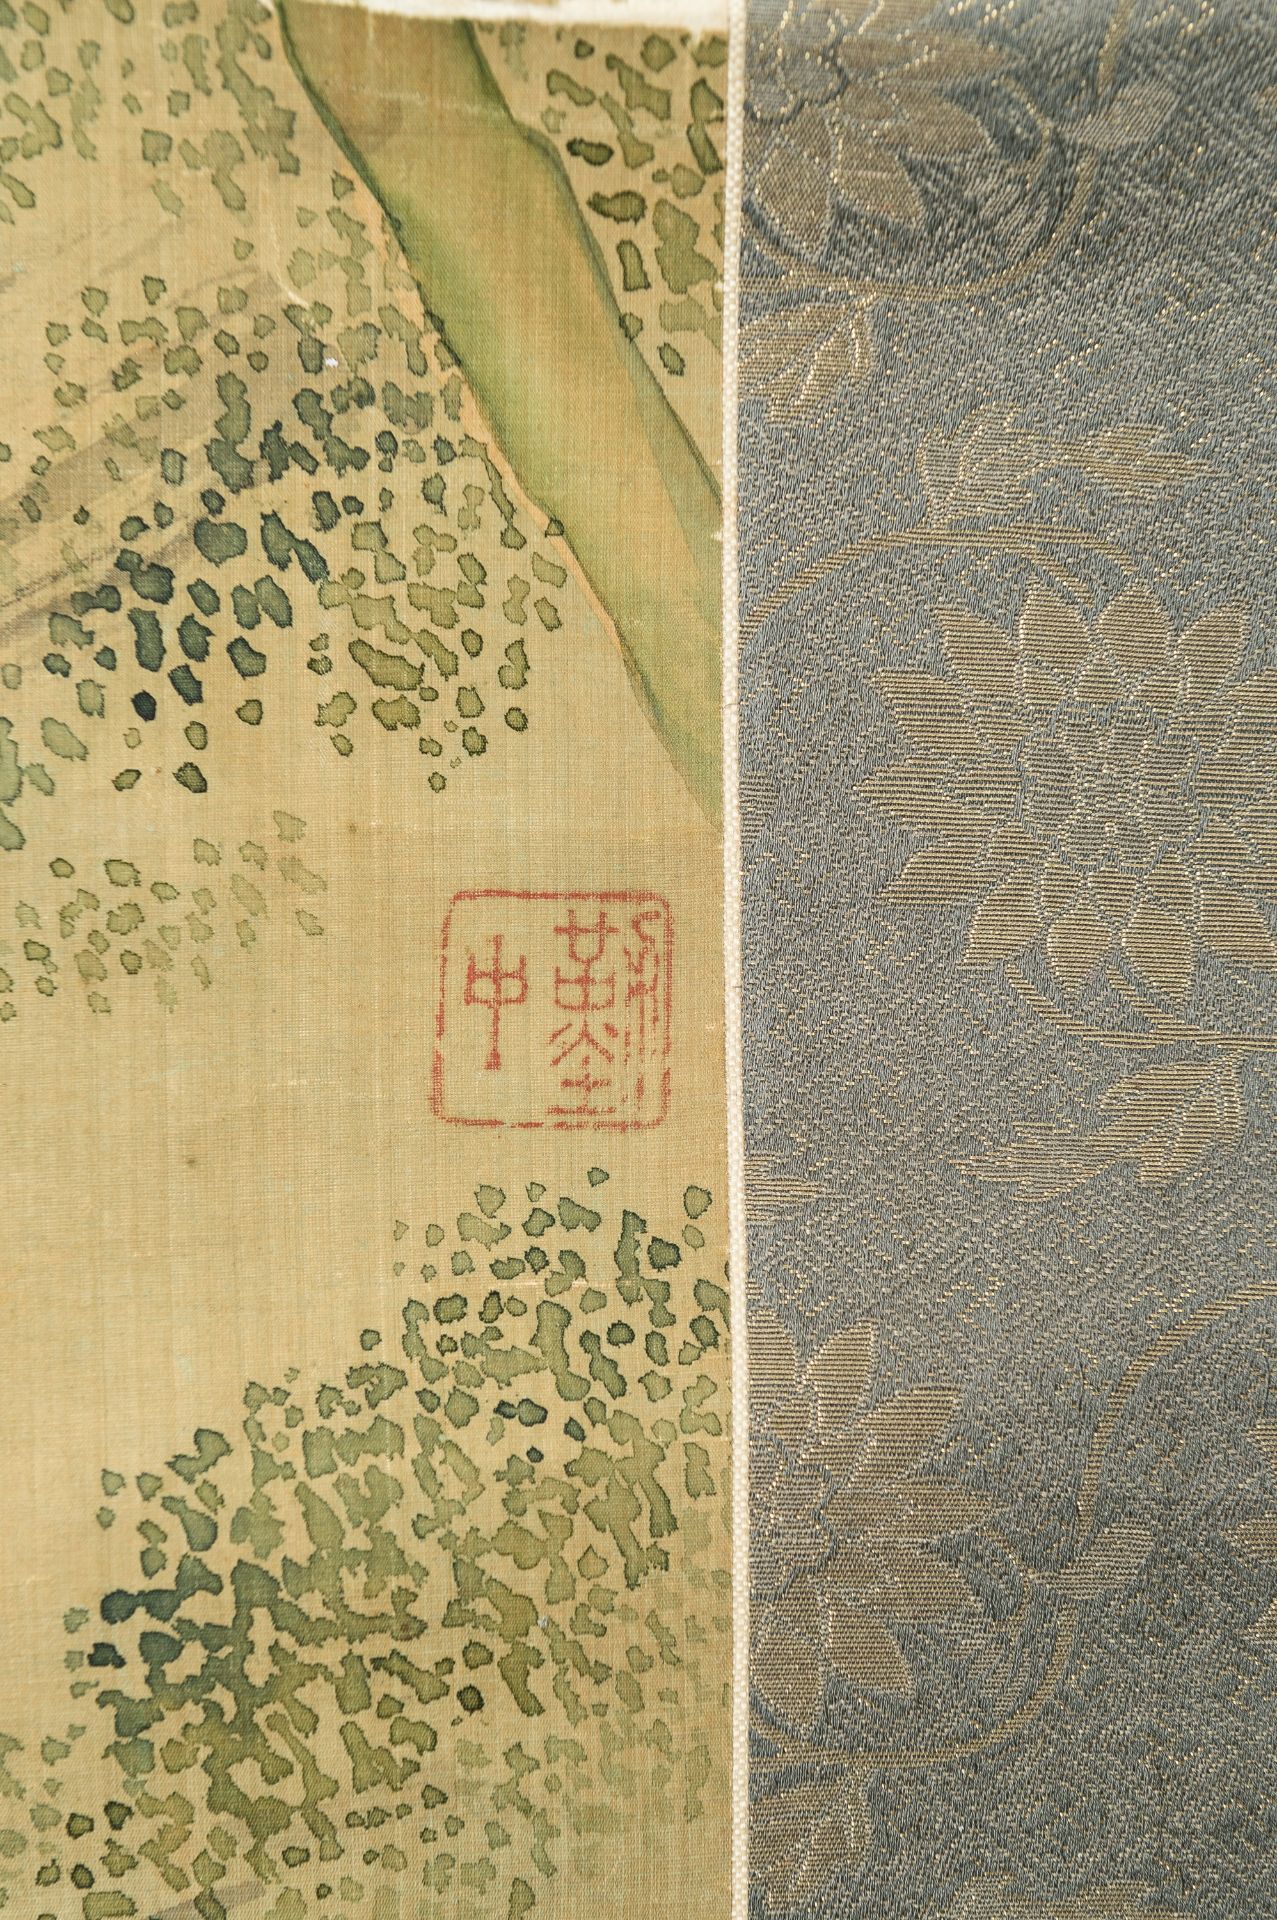 A GROUP OF THREE SCROLL PAINTINGS WITH DUCKS, BIRDS, AND RABBITS, QING - Image 18 of 30